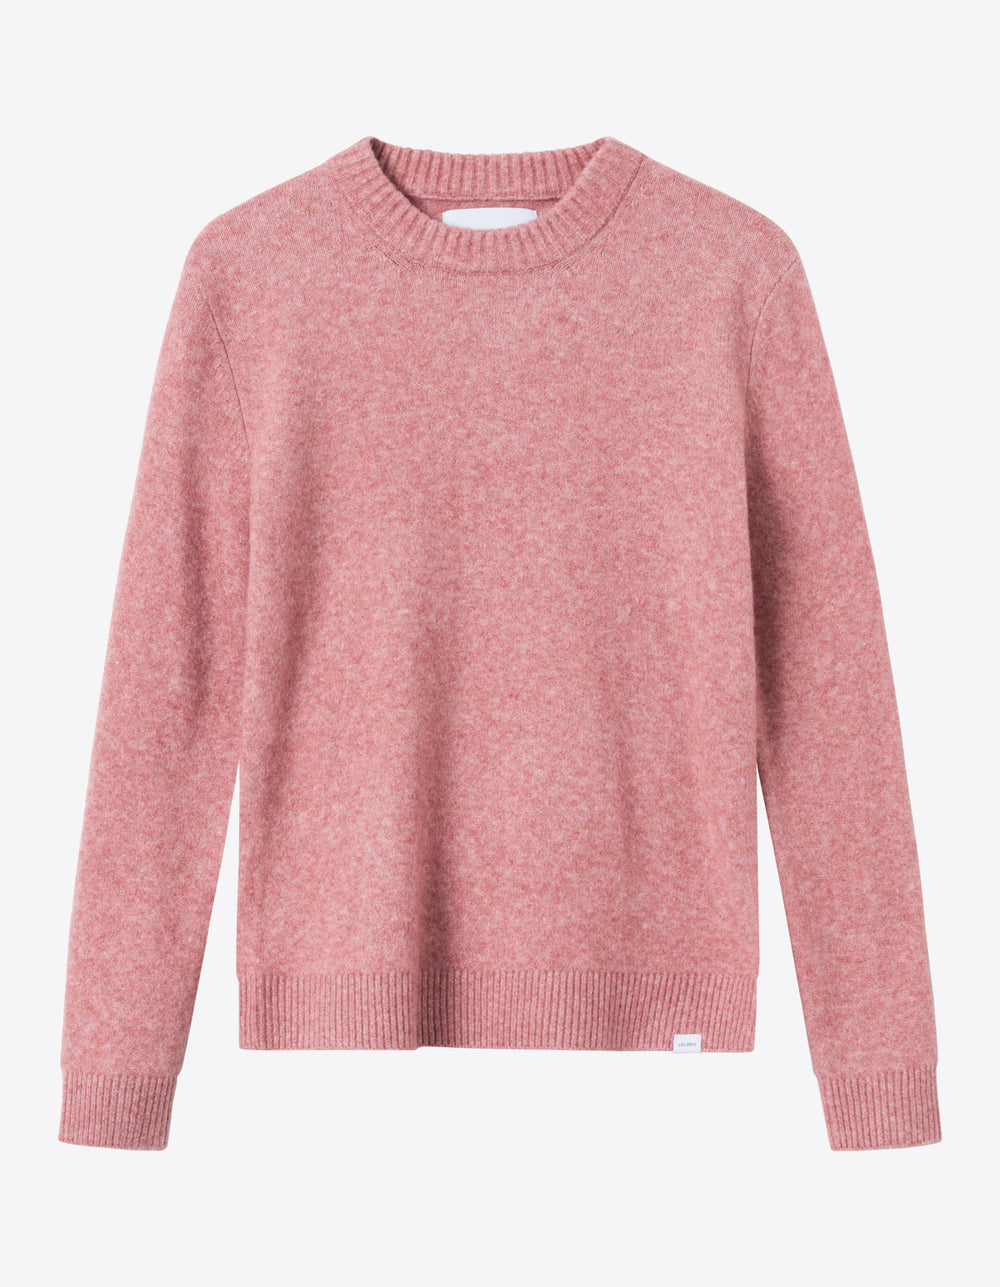 FRANCIS RECYCLED KNIT - ASH PINK